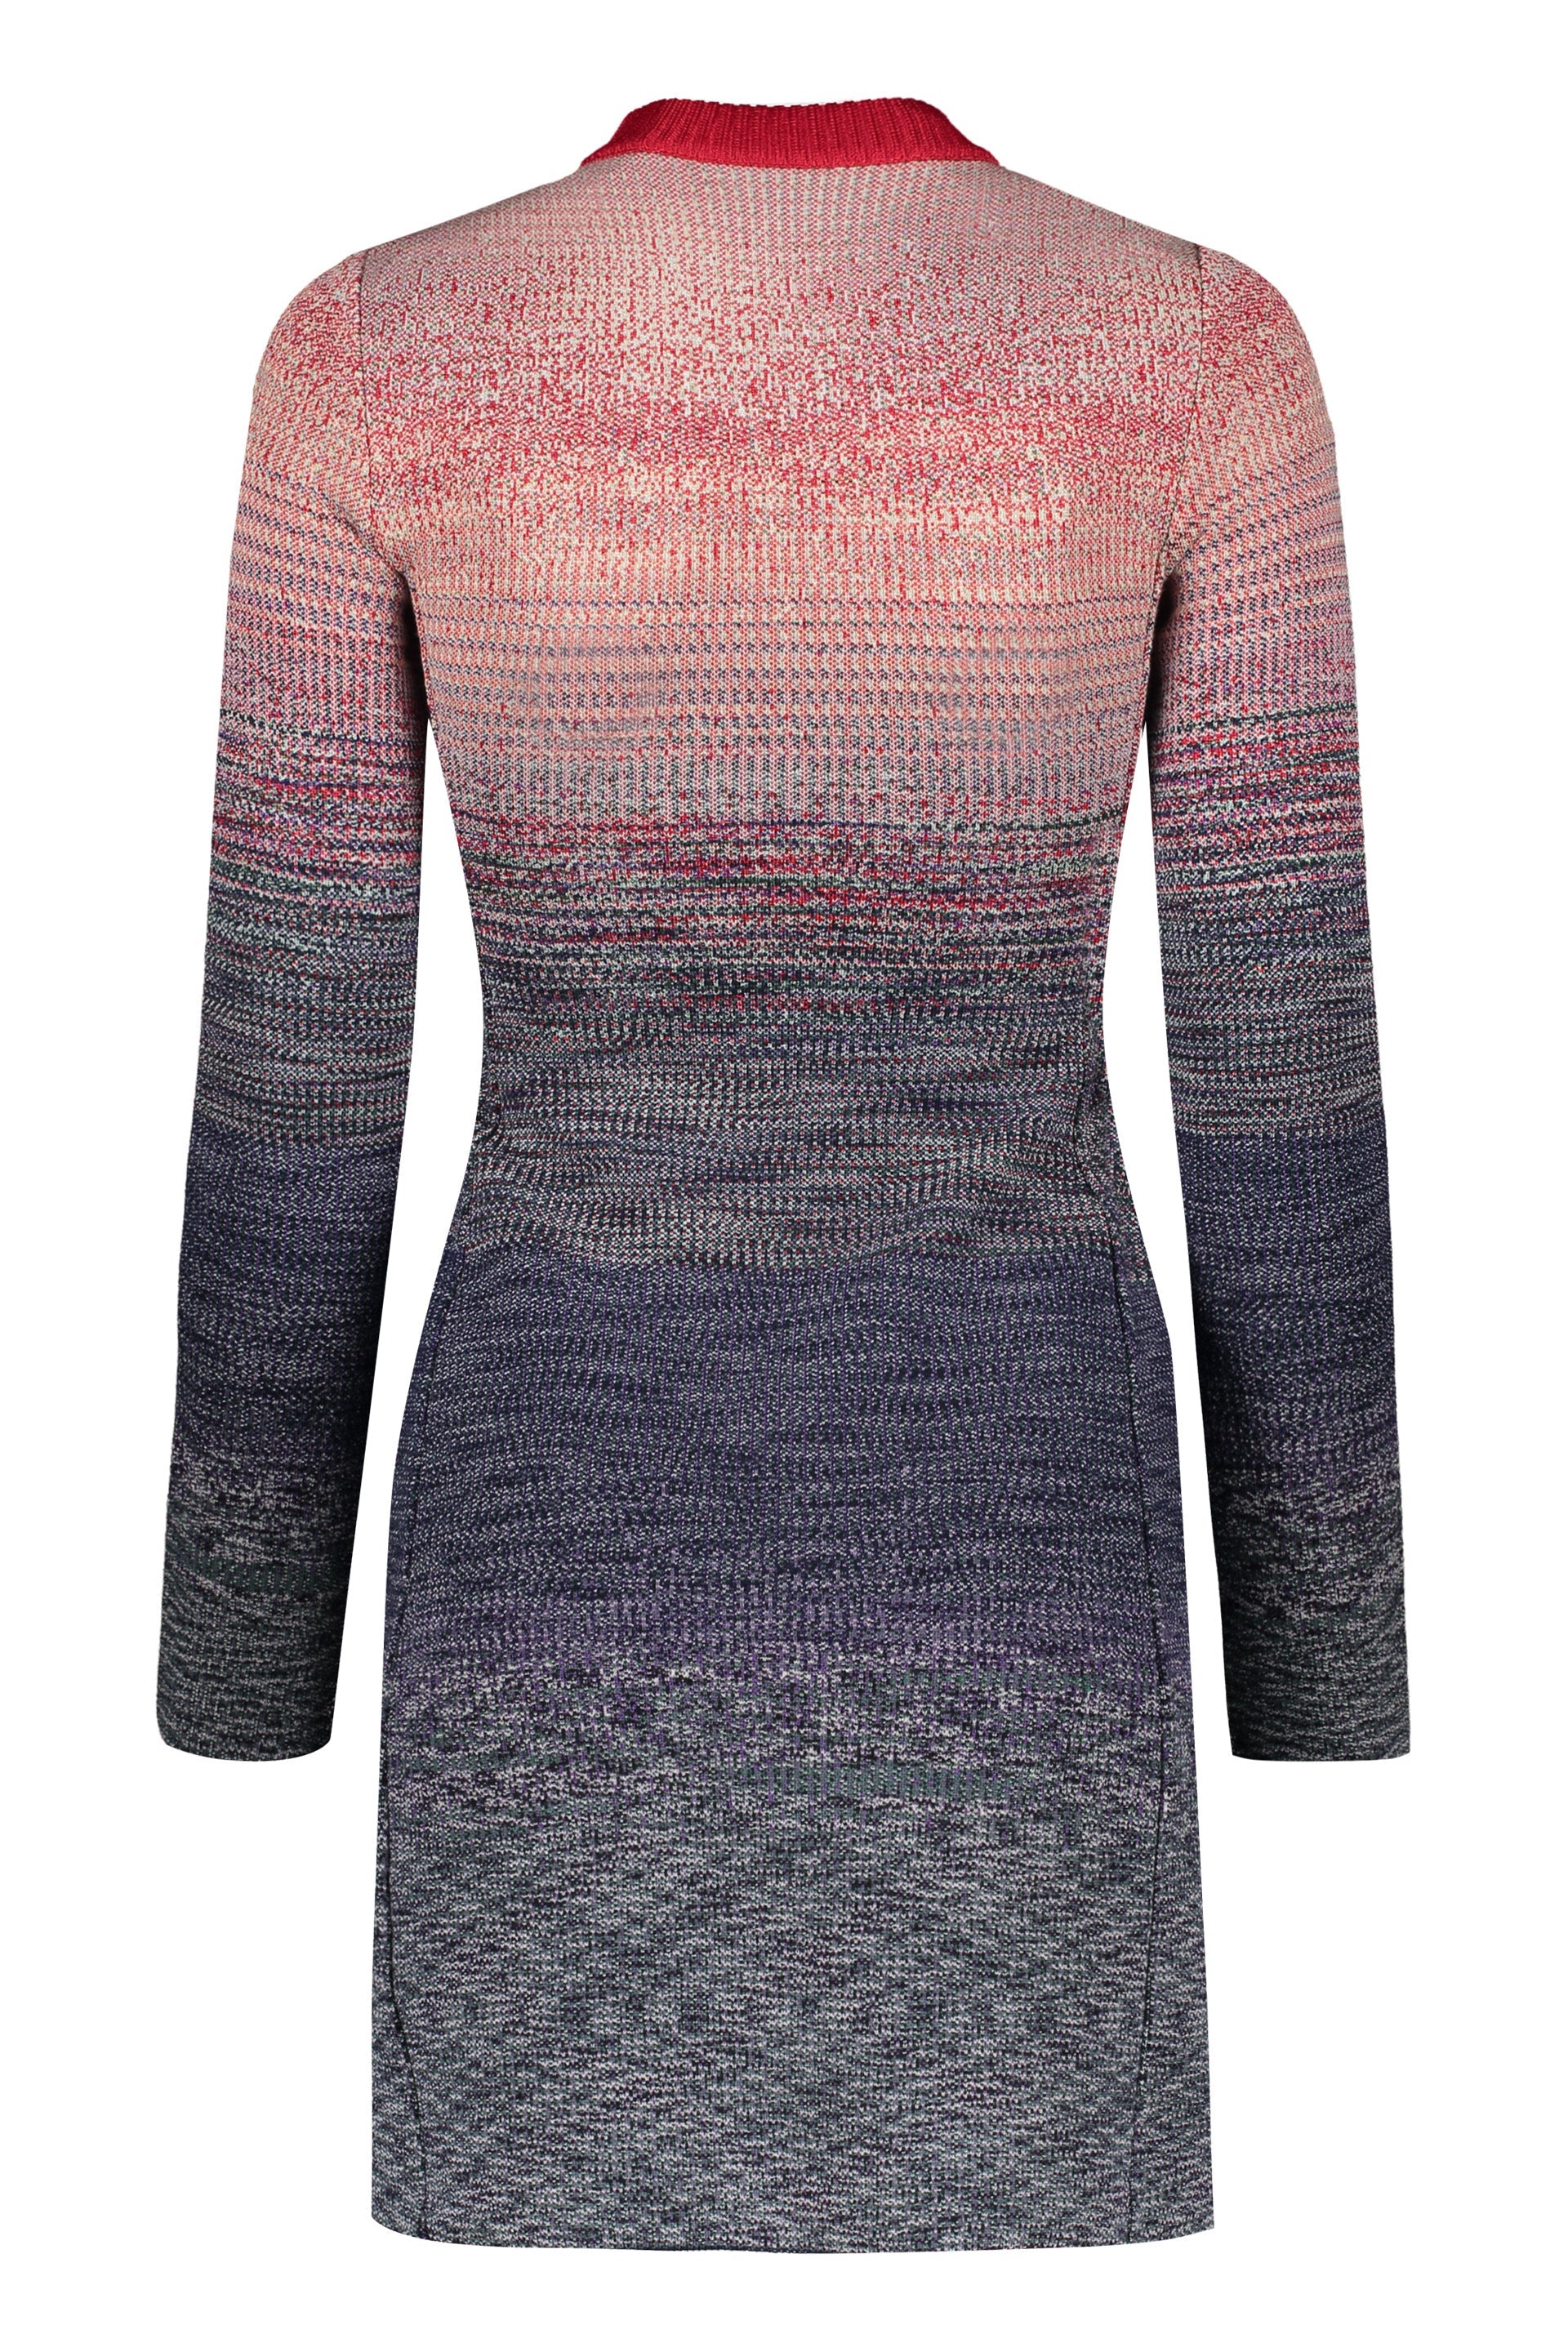 Missoni-OUTLET-SALE-Knitted-dress-Kleider-Rocke-40-ARCHIVE-COLLECTION-2_eda22905-9380-4b90-a2df-674f8c5c9088.jpg